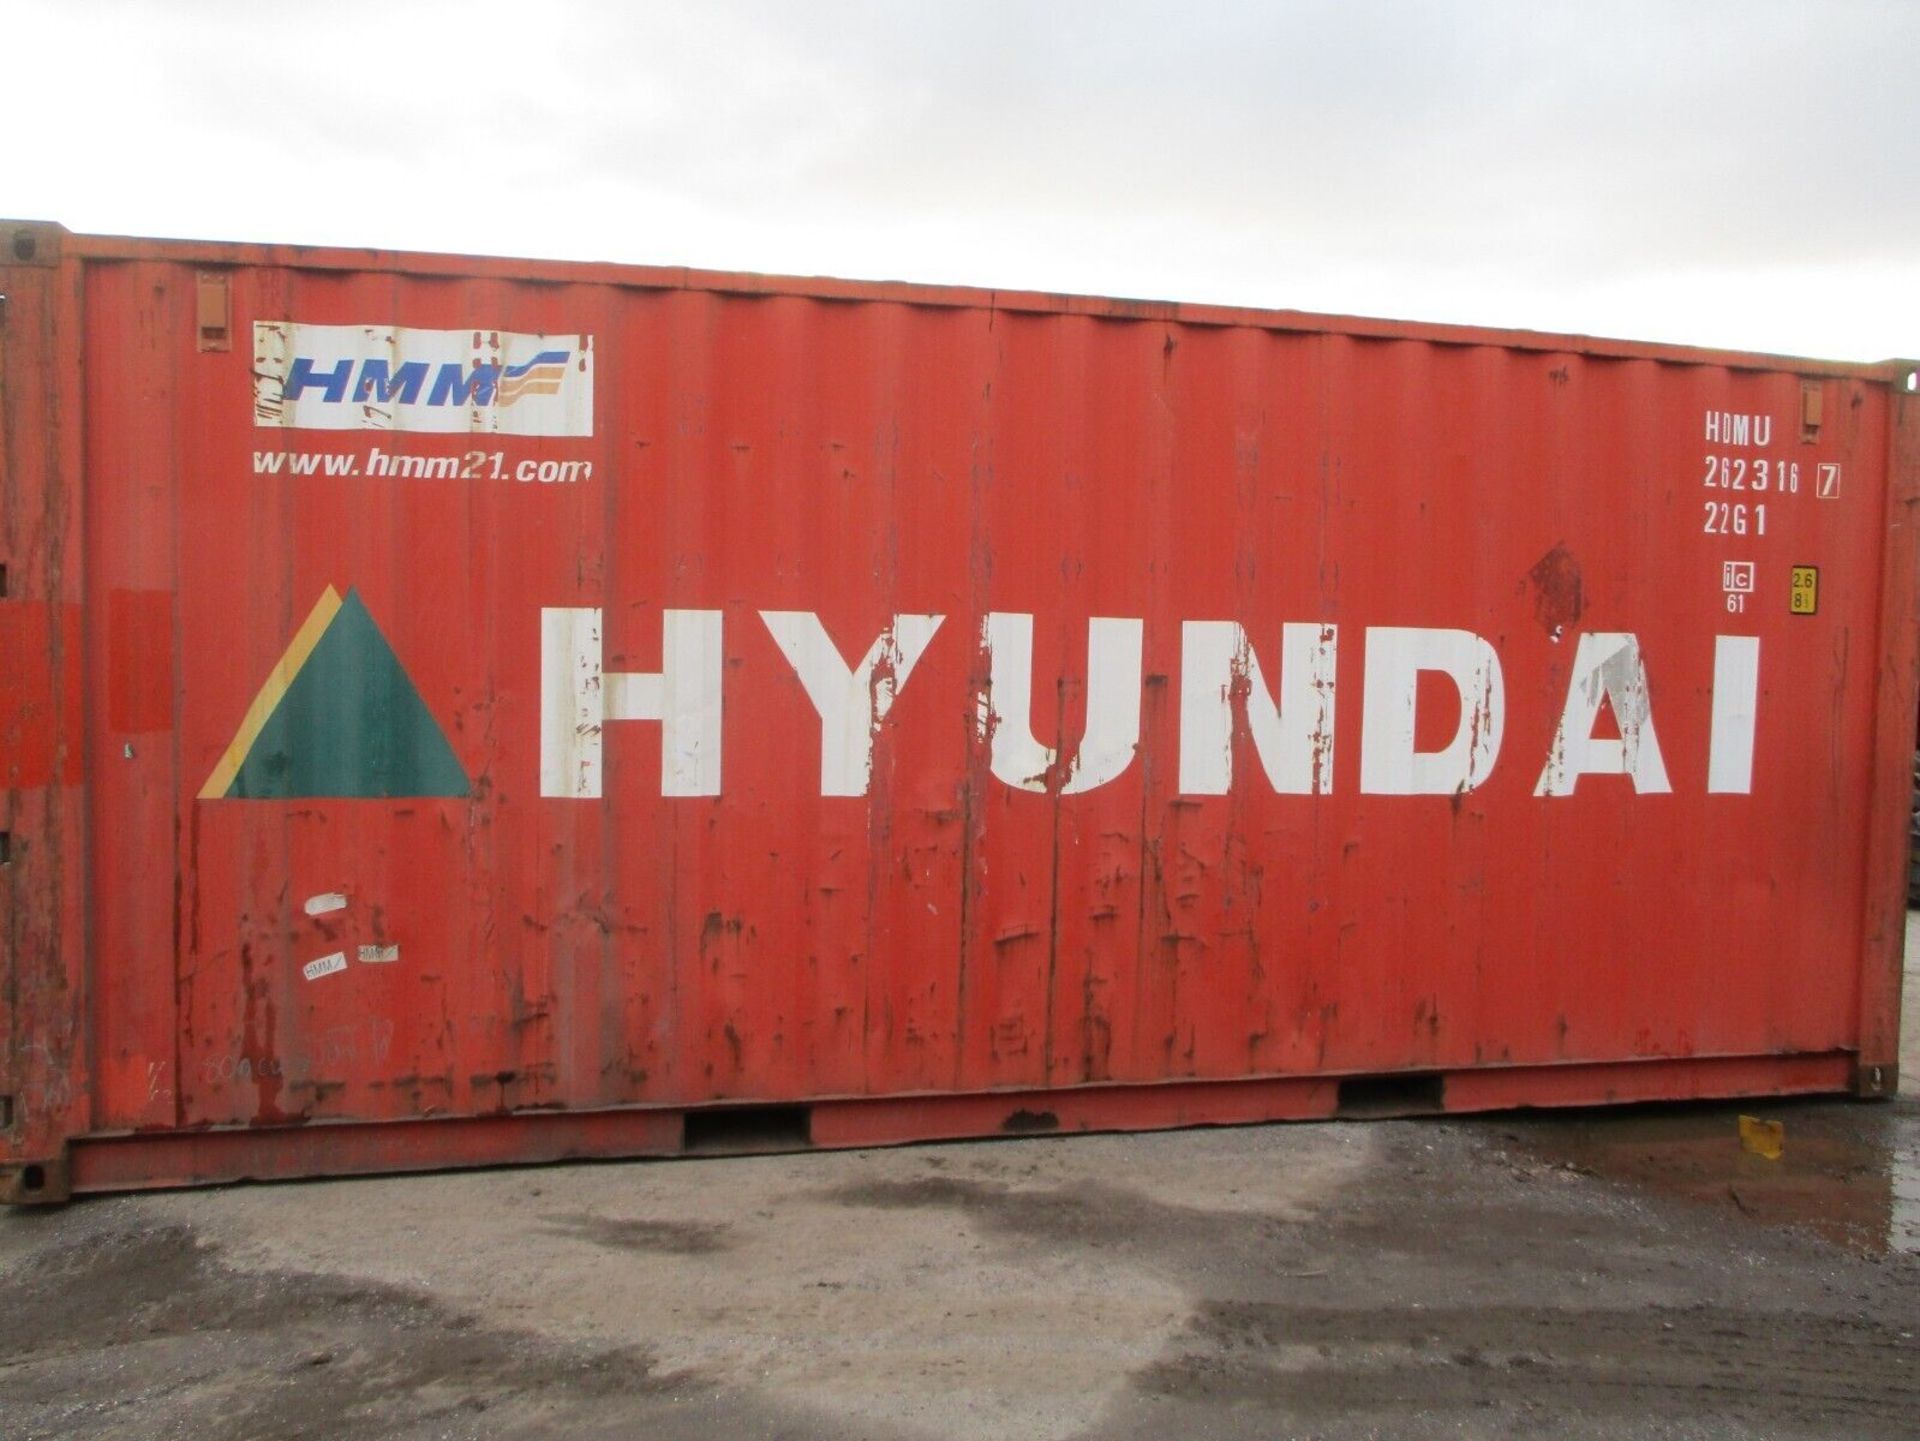 20 FEET LONG X 8 FEET WIDE SHIPPING CONTAINER - Image 6 of 13